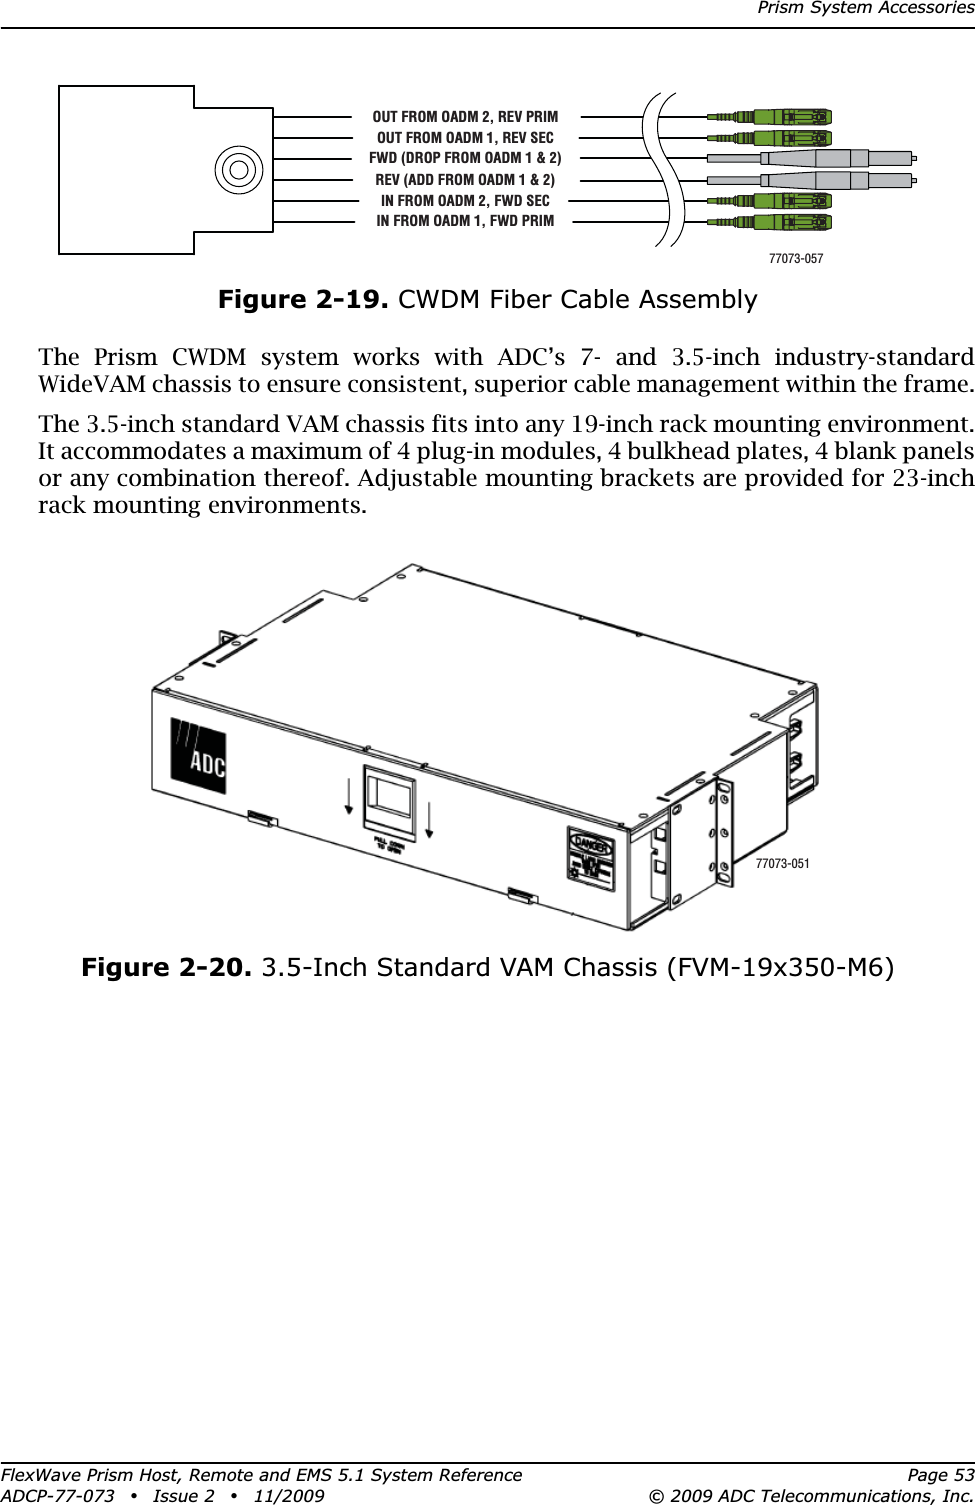 Prism System AccessoriesFlexWave Prism Host, Remote and EMS 5.1 System Reference Page 53ADCP-77-073 • Issue 2 • 11/2009 © 2009 ADC Telecommunications, Inc.Figure 2-19. CWDM Fiber Cable AssemblyThe Prism CWDM system works with ADC’s 7- and 3.5-inch industry-standard WideVAM chassis to ensure consistent, superior cable management within the frame.The 3.5-inch standard VAM chassis fits into any 19-inch rack mounting environment. It accommodates a maximum of 4 plug-in modules, 4 bulkhead plates, 4 blank panels or any combination thereof. Adjustable mounting brackets are provided for 23-inch rack mounting environments.Figure 2-20. 3.5-Inch Standard VAM Chassis (FVM-19x350-M6)OUT FROM OADM 1, REV SECFWD (DROP FROM OADM 1 &amp; 2)REV (ADD FROM OADM 1 &amp; 2)IN FROM OADM 2, FWD SECIN FROM OADM 1, FWD PRIMOUT FROM OADM 2, REV PRIM77073-05777073-051